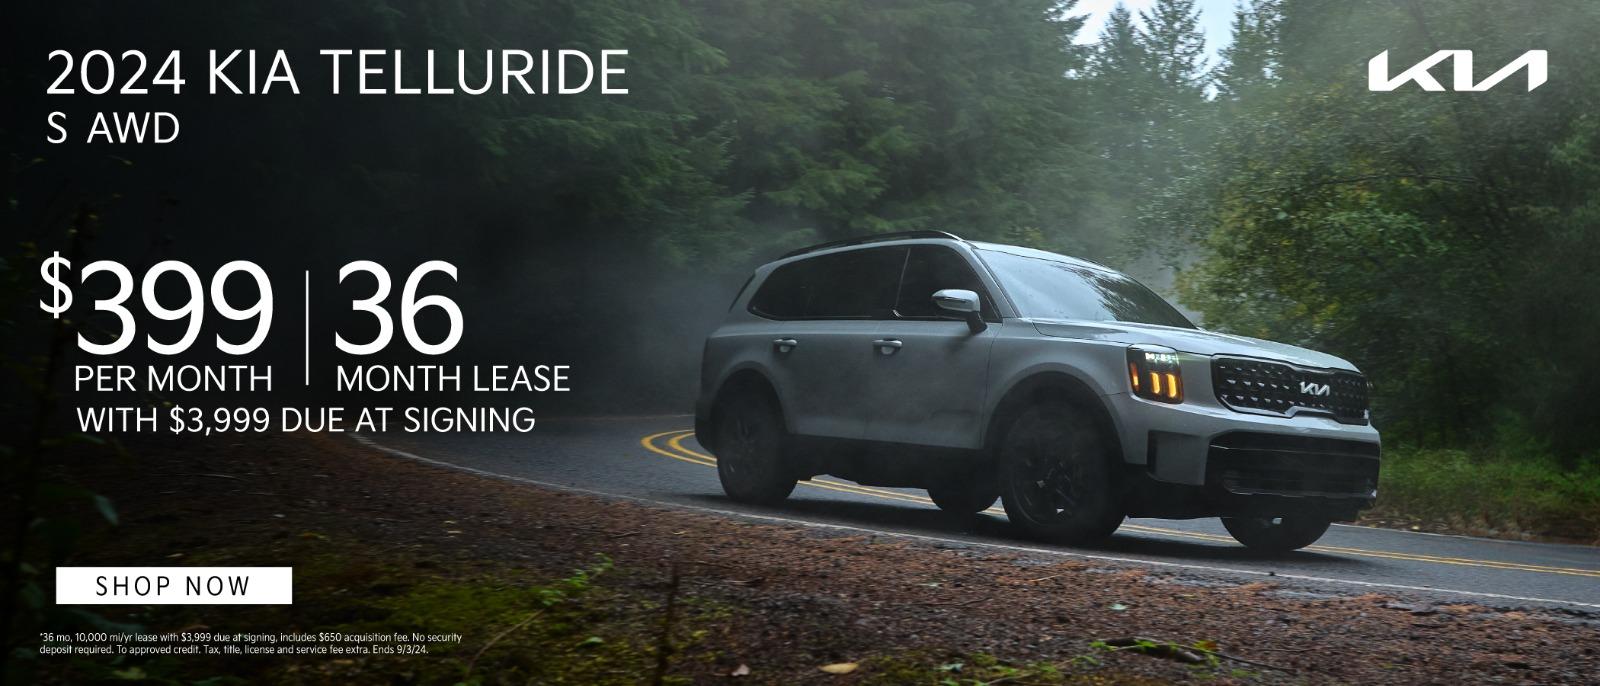 2024 KIA Telluride lease for $399per month for 36 months